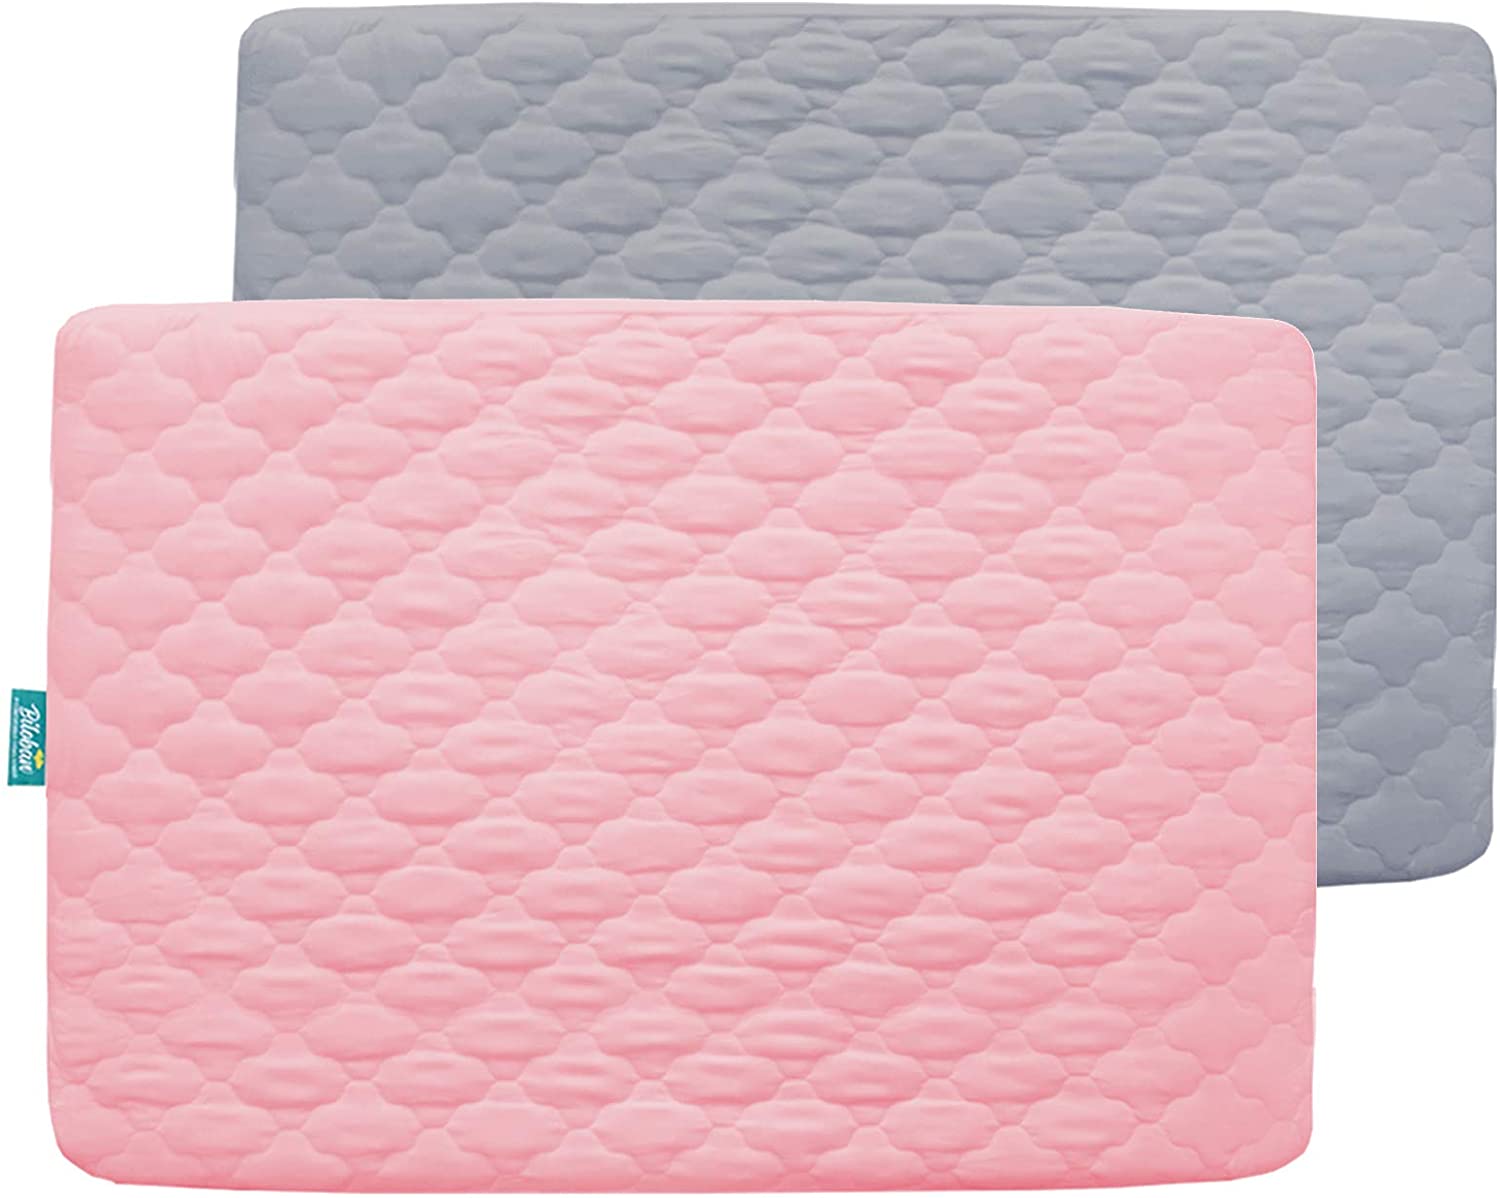 Pack N Play Mattress Pad Cover Quilted - 2 Pack, Ultra Soft Microfiber, Waterproof, Pink & Grey (39” x 27") - Biloban Online Store